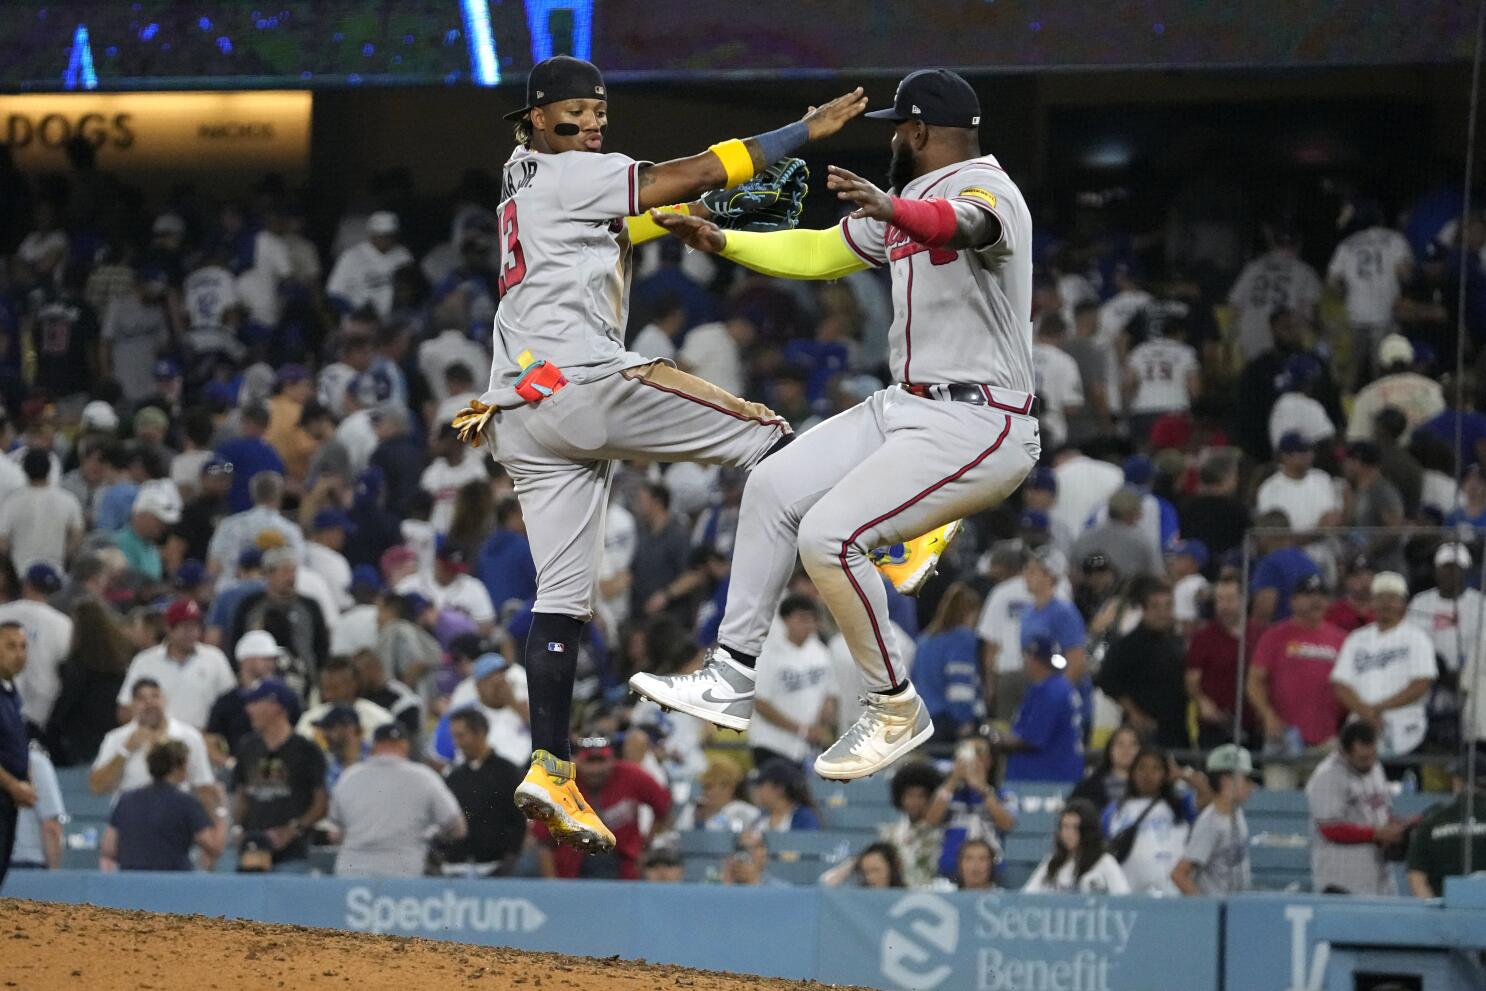 Braves star Ronald Acuña Jr. gets married, then hits grand slam to